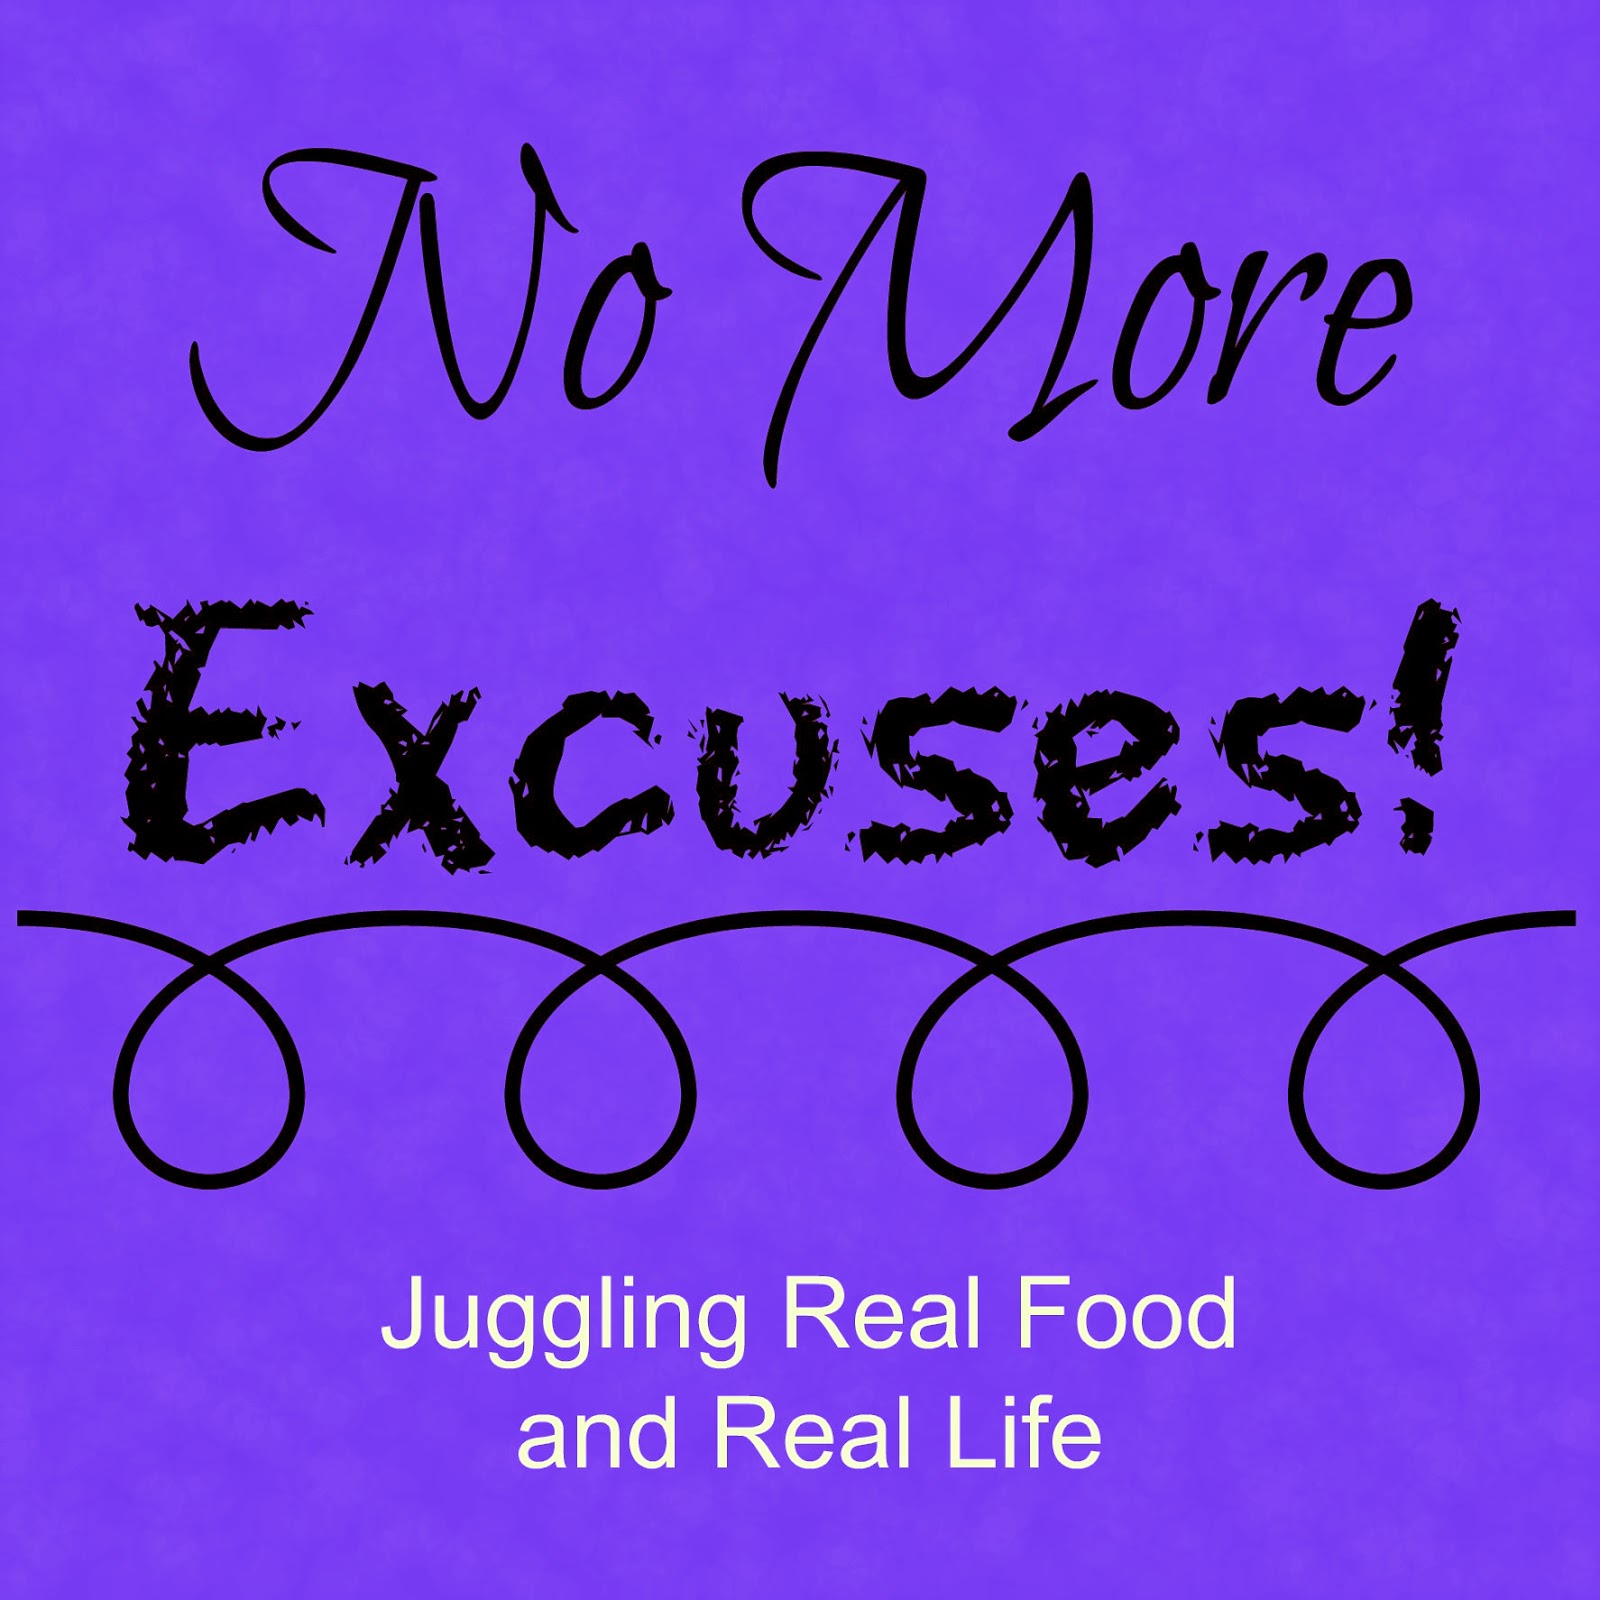 No More Excuses! Let’s Eat Real Food – Juggling Real Food and Real Life